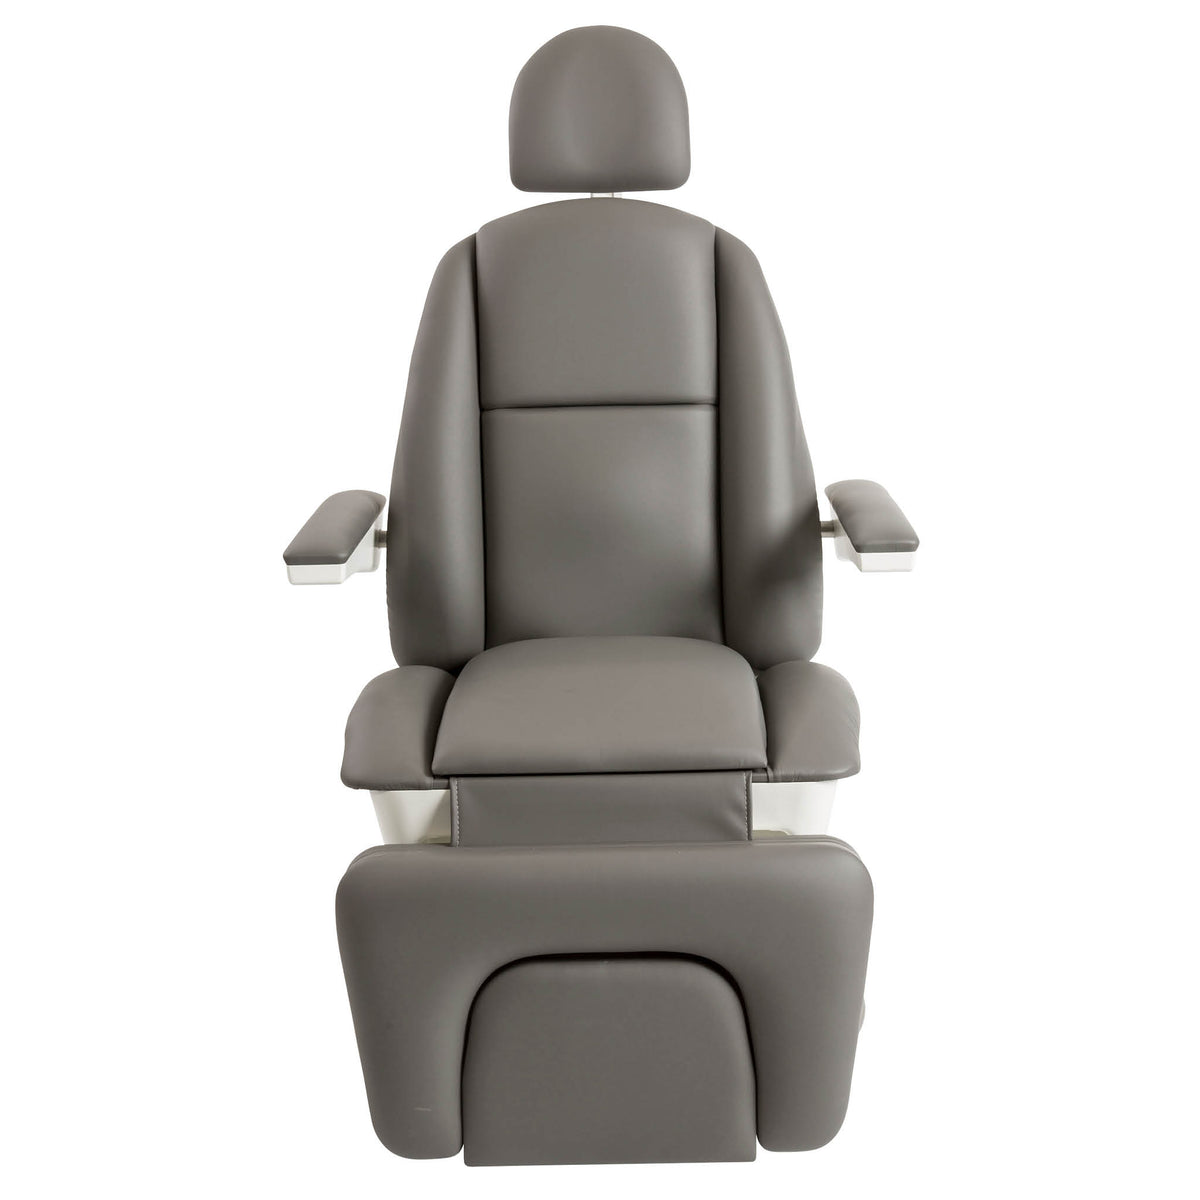 GLOBAL Maxi4500 Patient Chair front